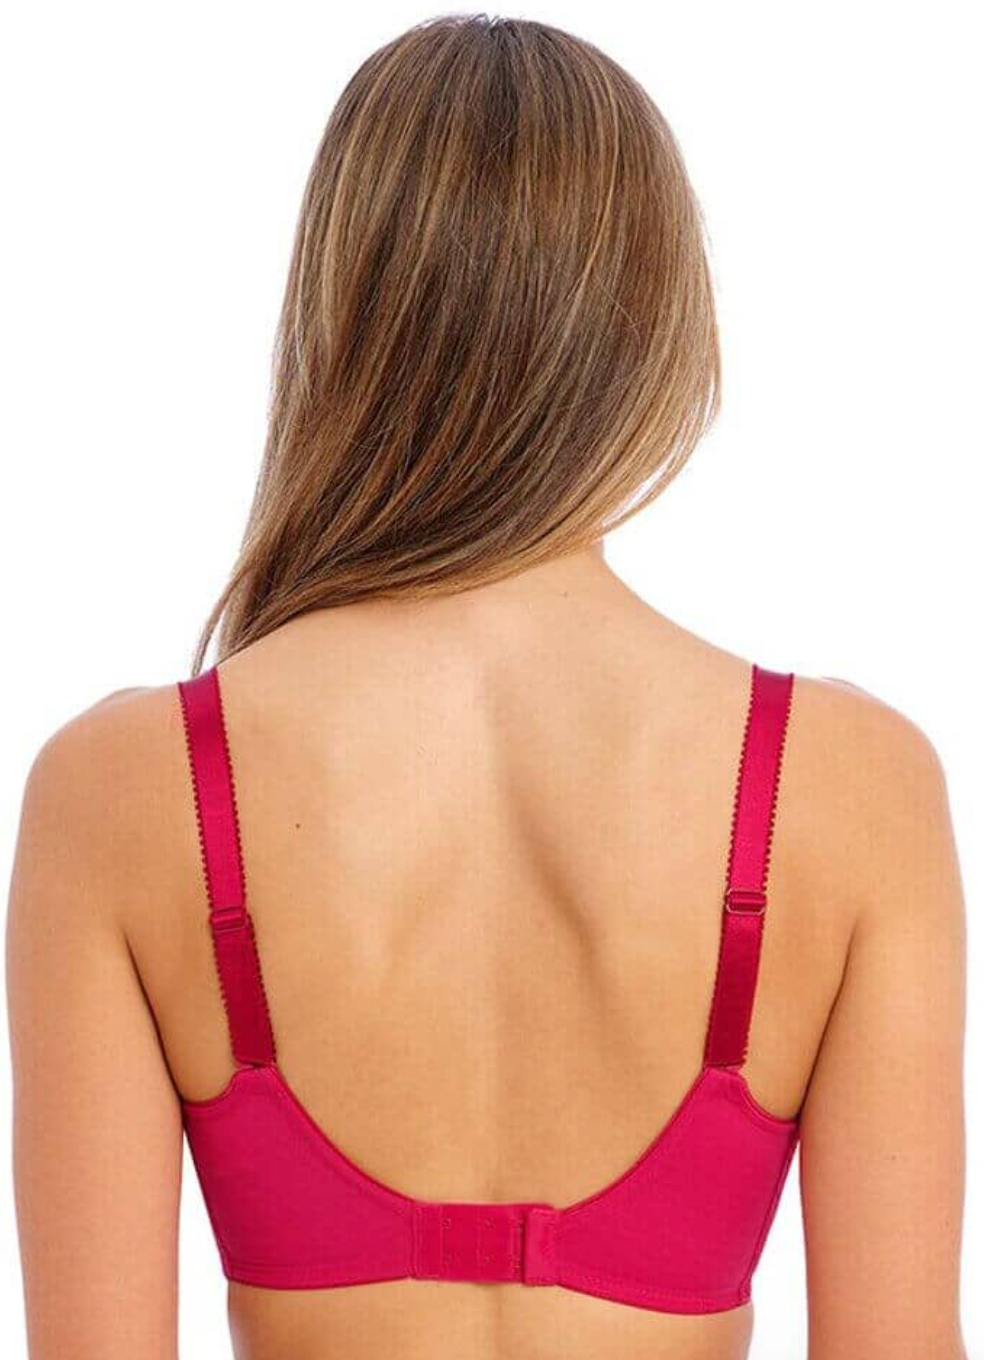 Envisage Full Cup Side Support Bra - Raspberry